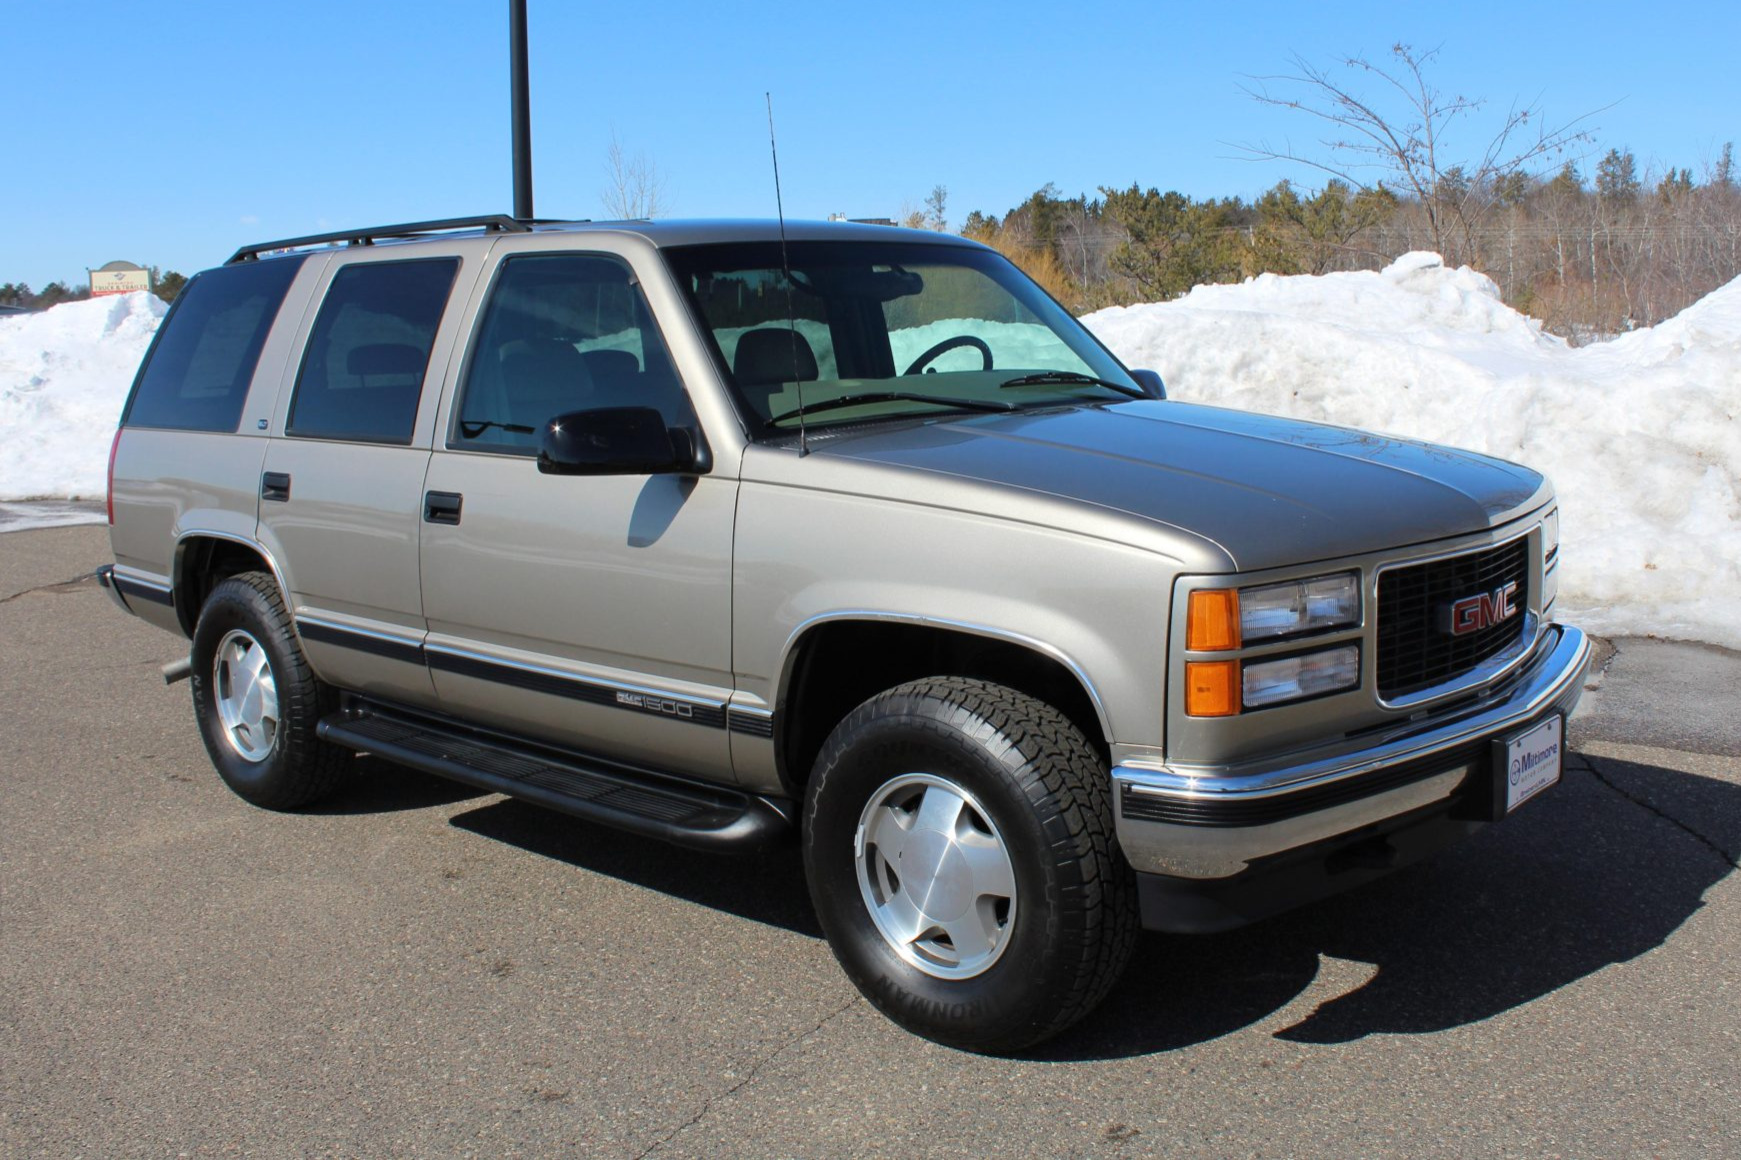 1999 GMC Yukon SLT 4x4 for sale on BaT Auctions - closed on March 28, 2022  (Lot #69,100) | Bring a Trailer